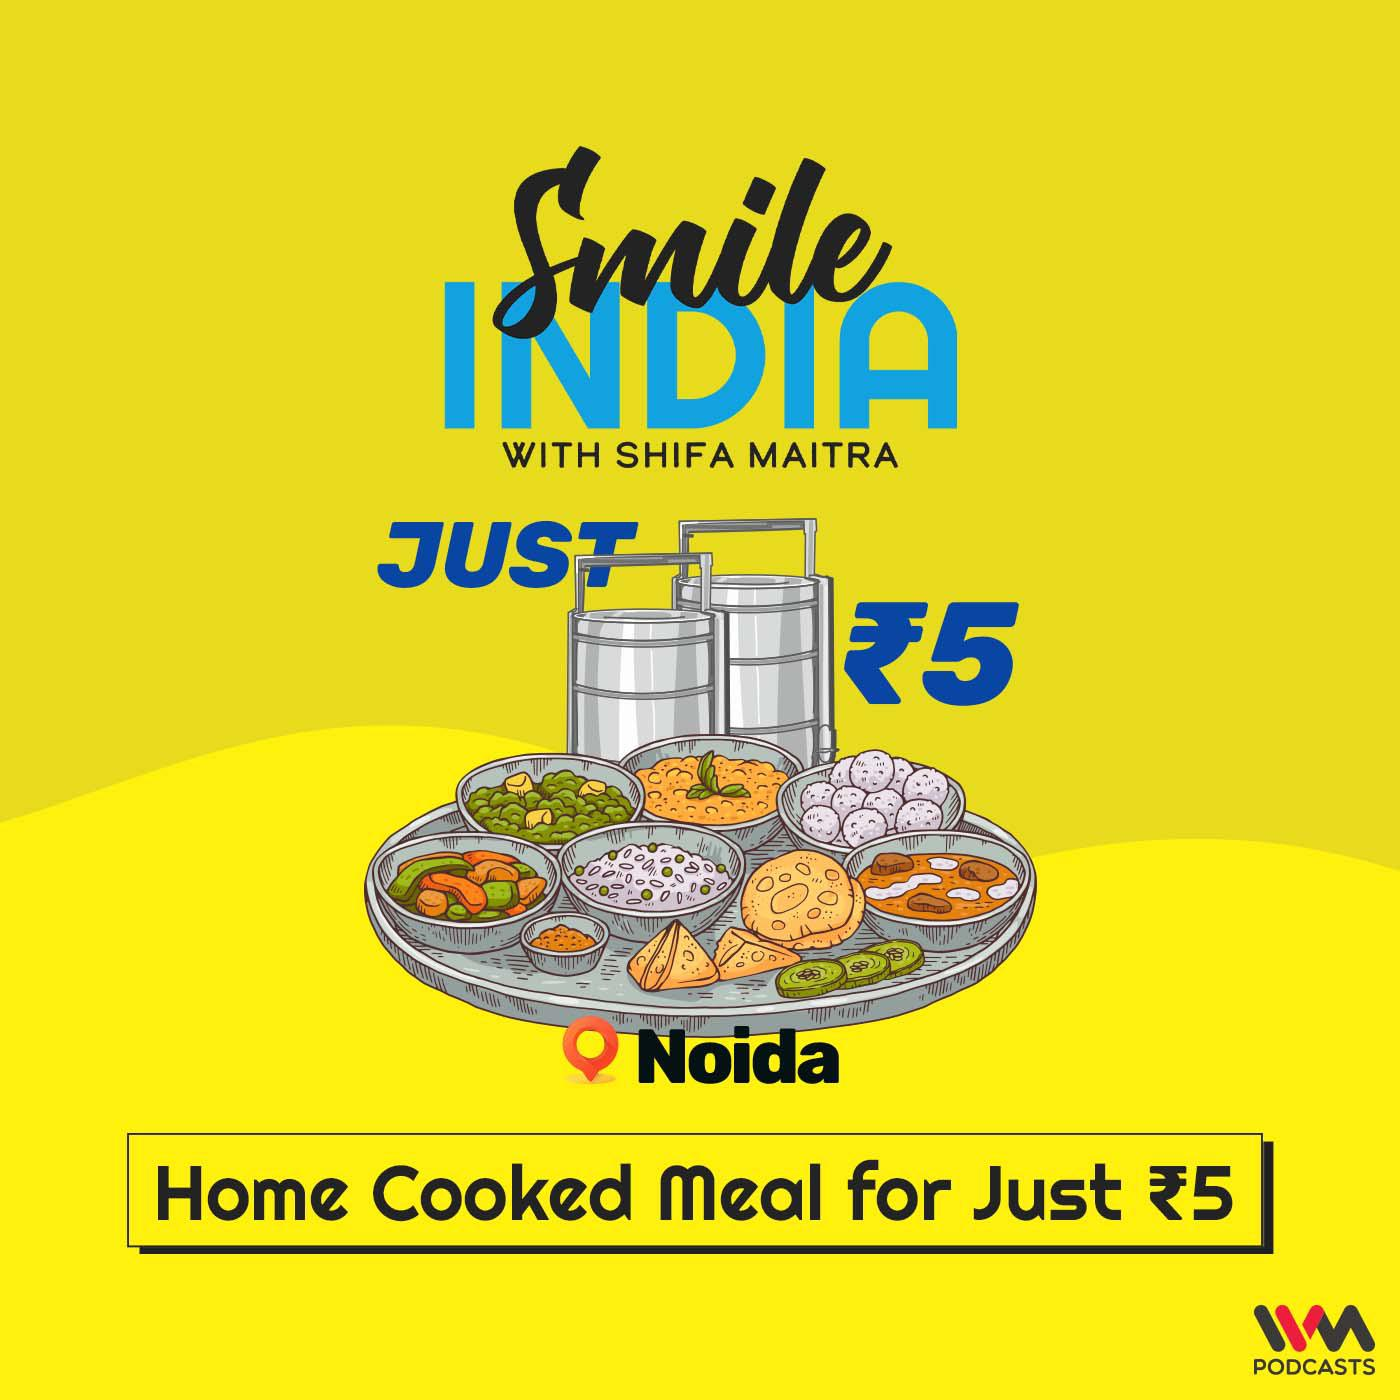 Home Cooked Meal for Just ₹5